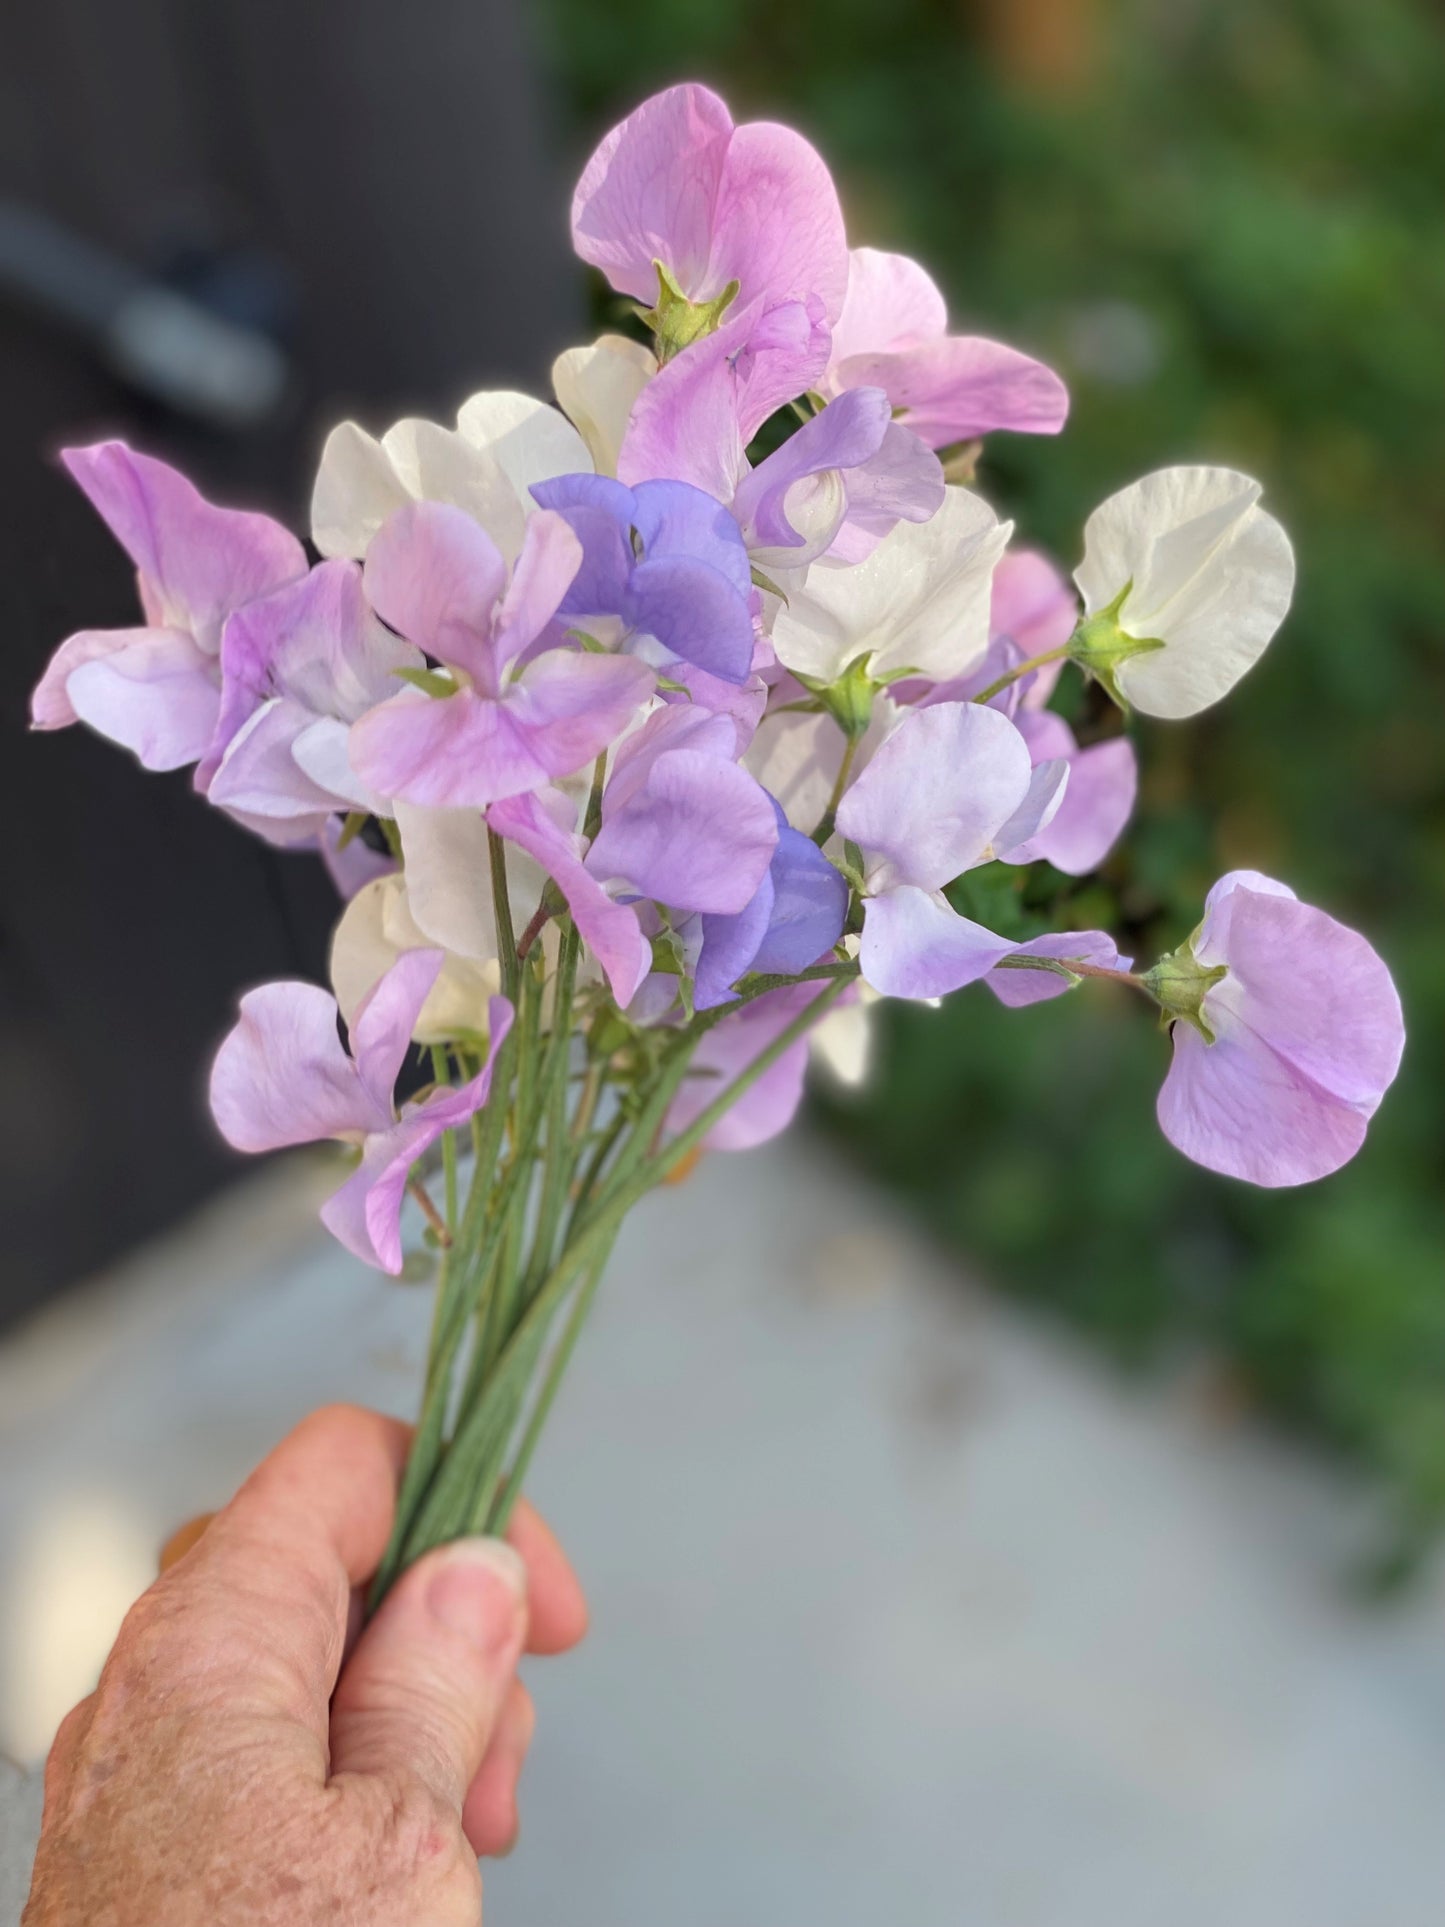 Sweet Pea Flowers from our garden